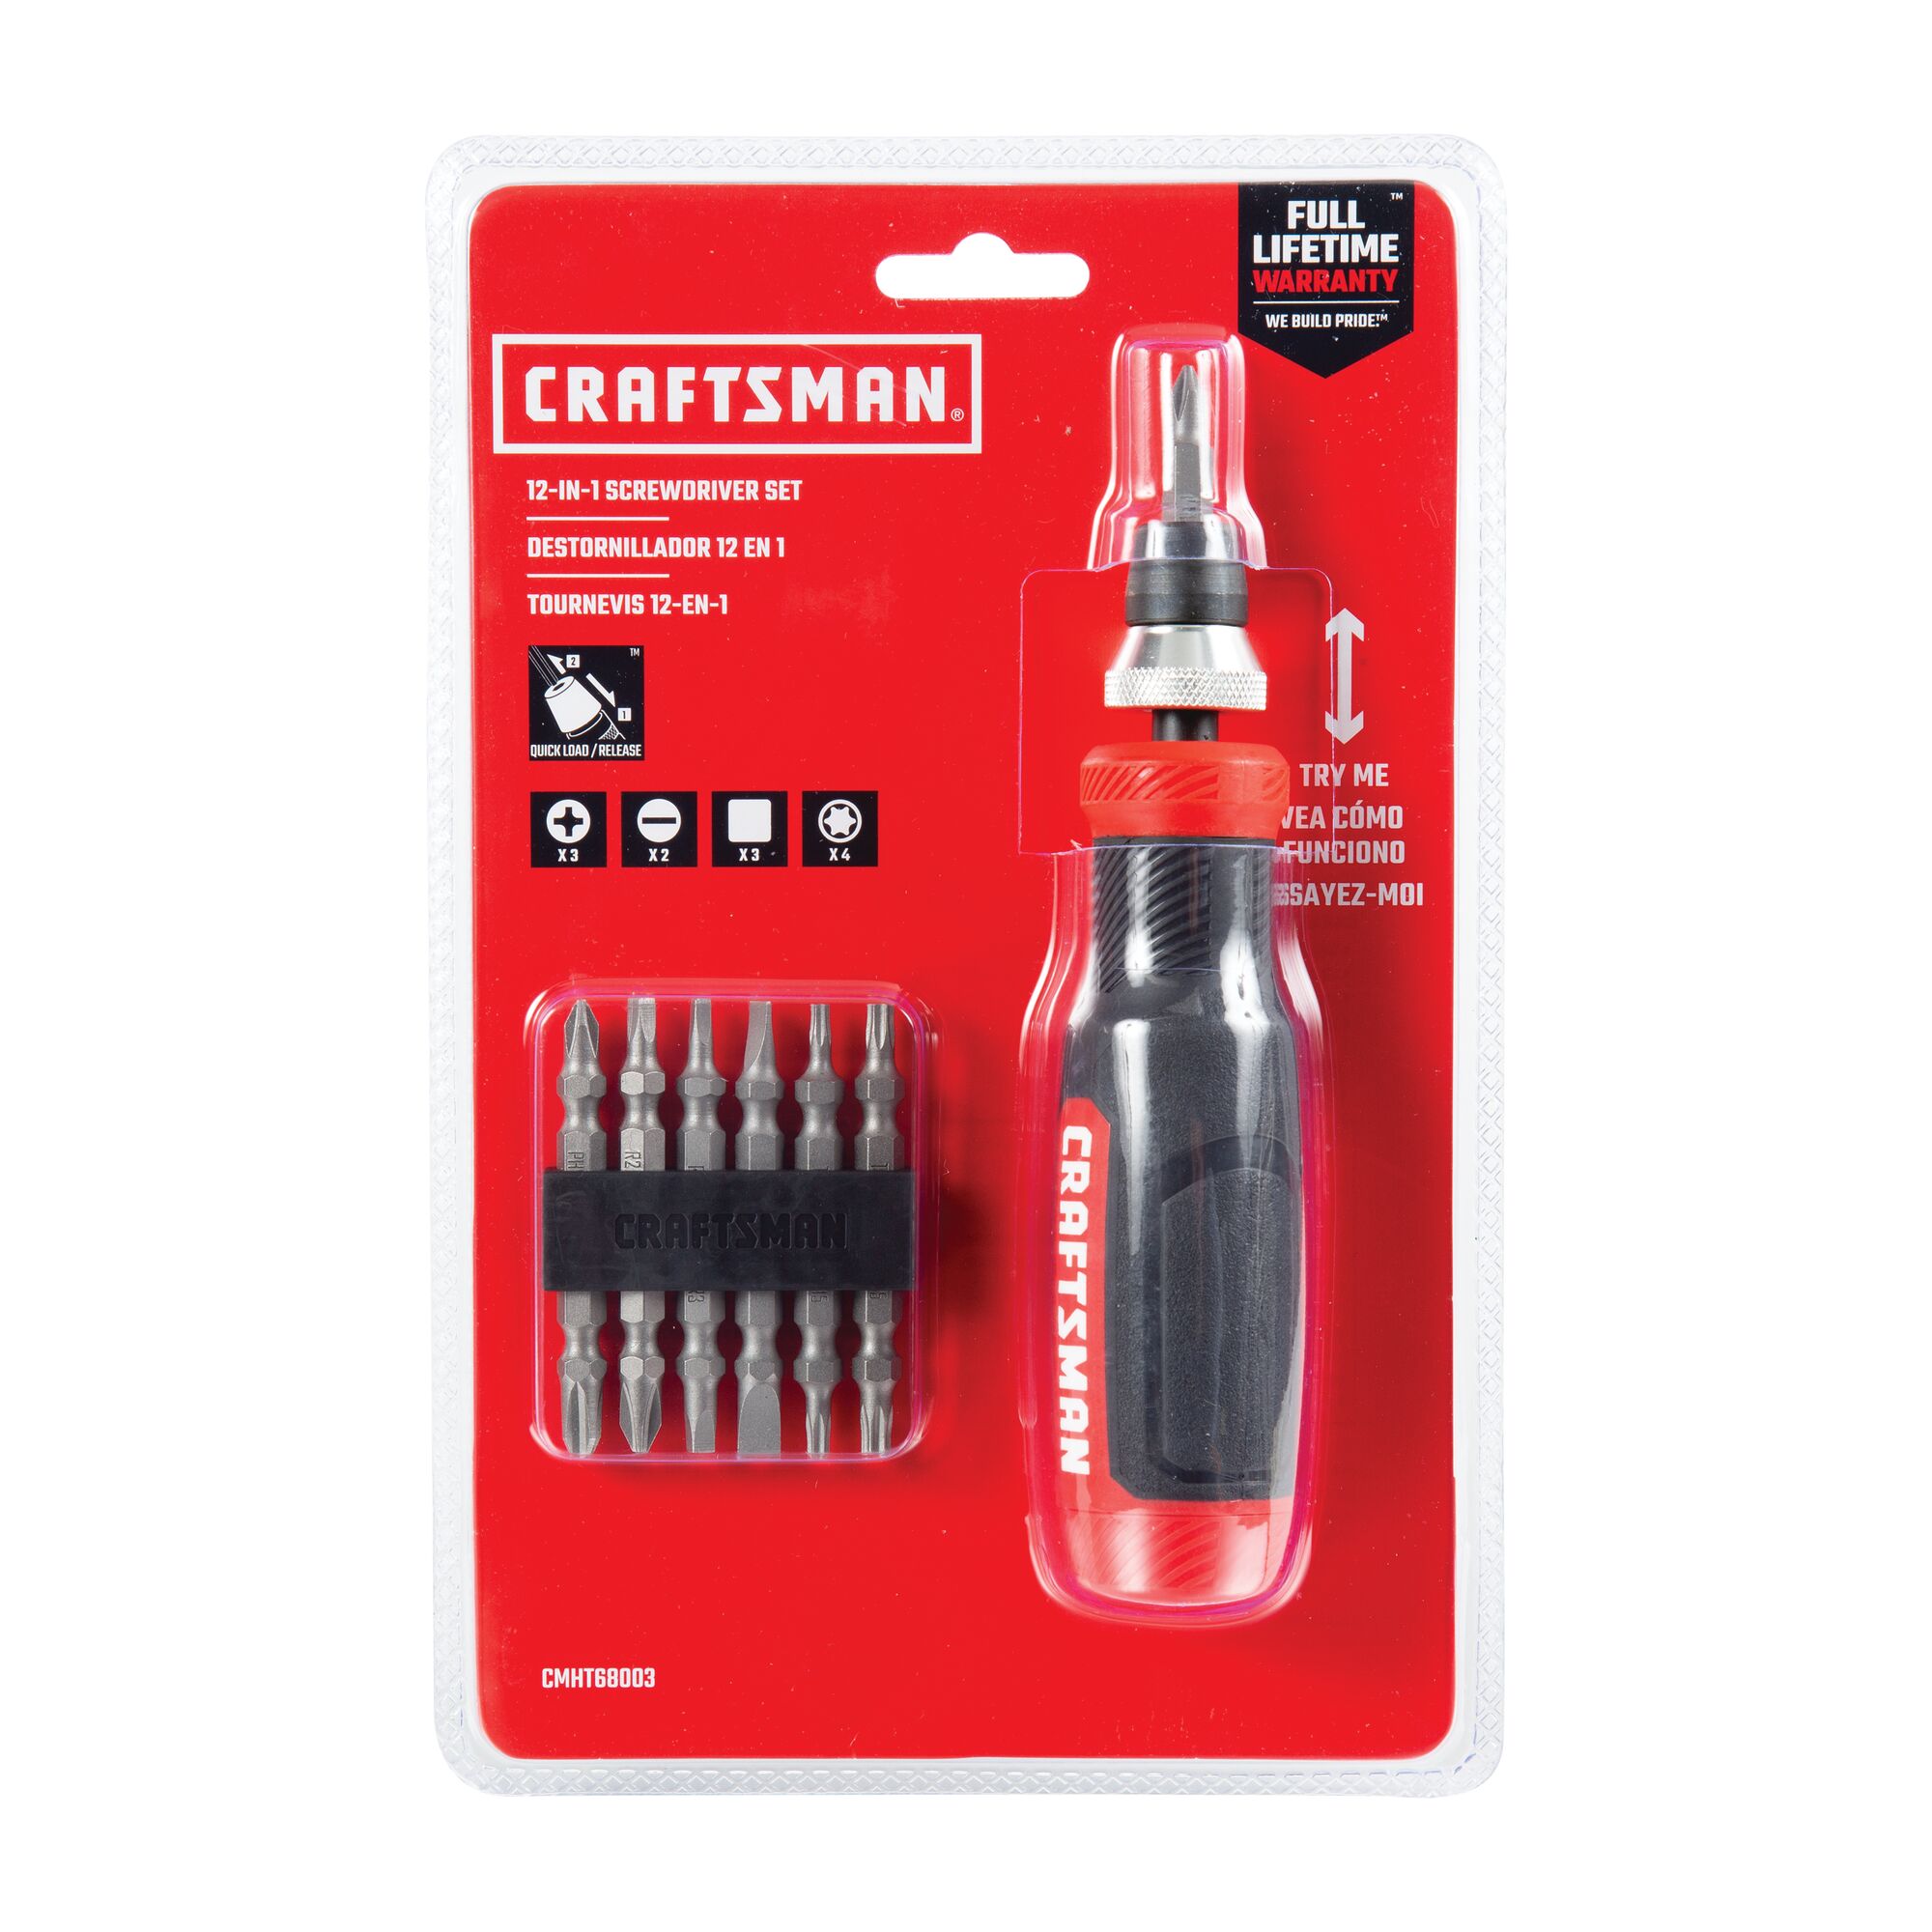 12 IN 1 Precision Multi Bit ScrewDriver Set in carded blister packaging.